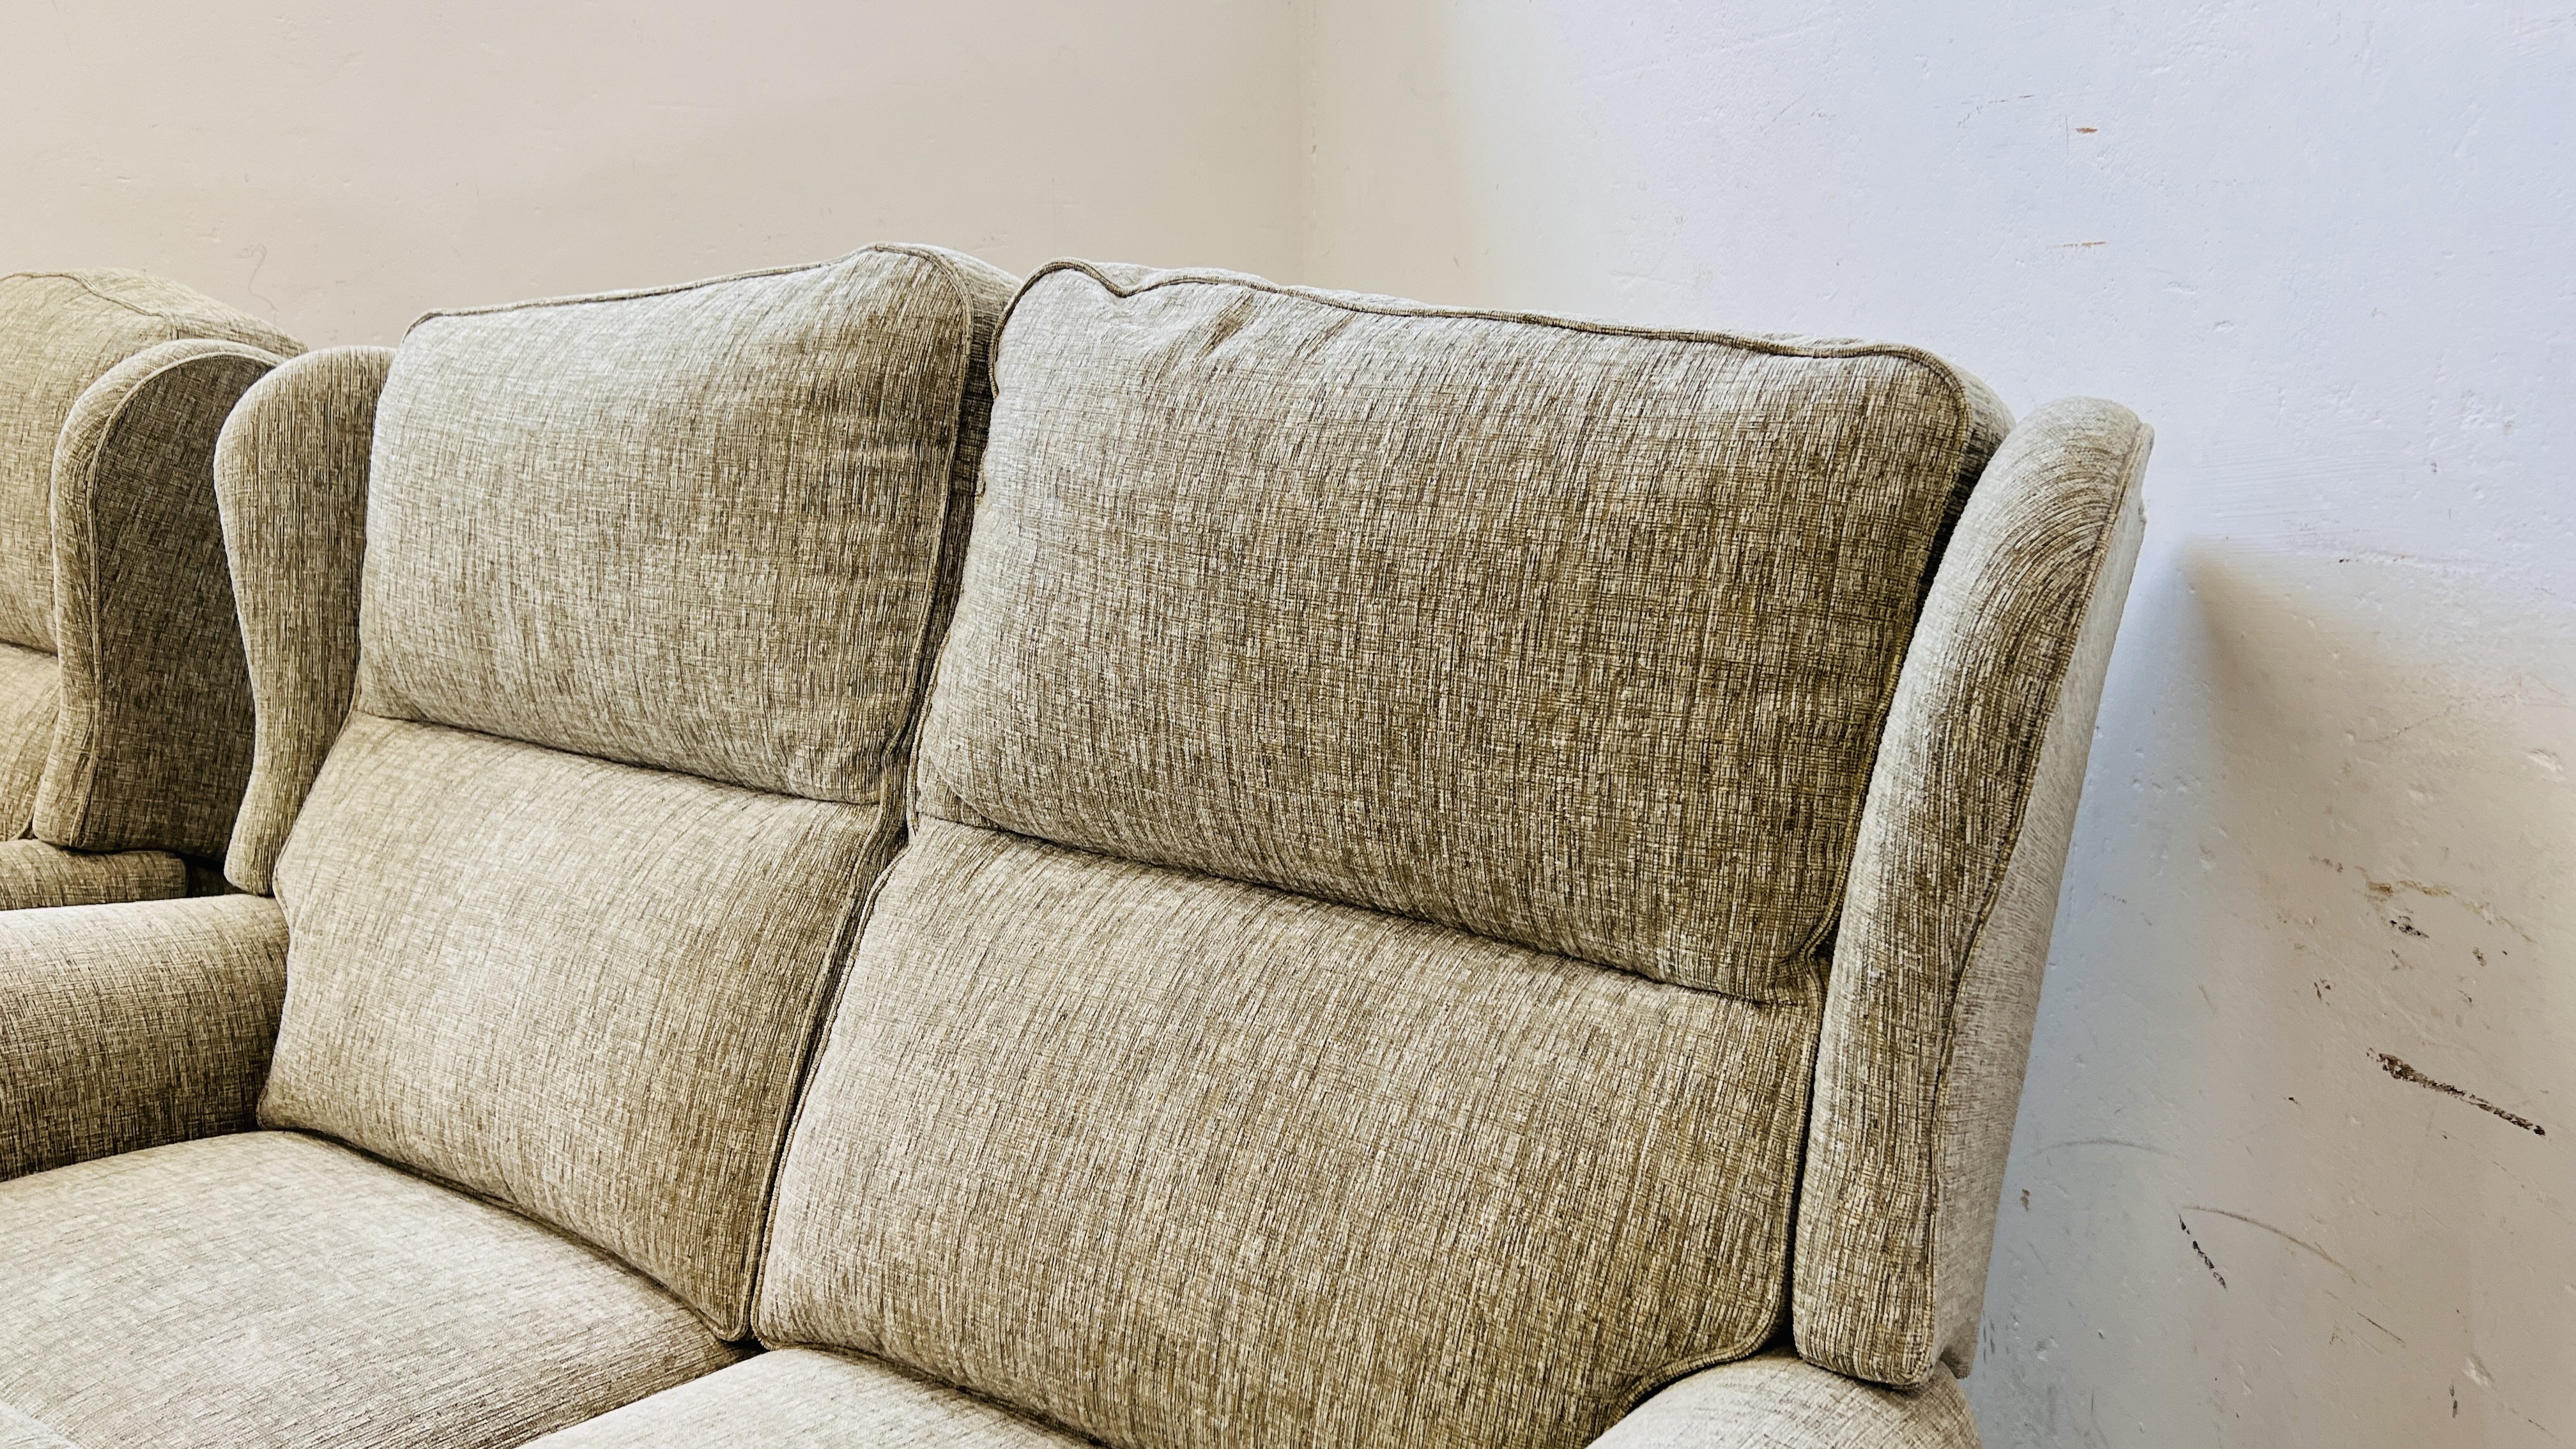 A GOOD QUALITY "SHERBORNE" TWO SEATER SOFA W 140CM X D 82CM X H 94CM ALONG WITH A MATCHING ARMCHAIR. - Image 5 of 14